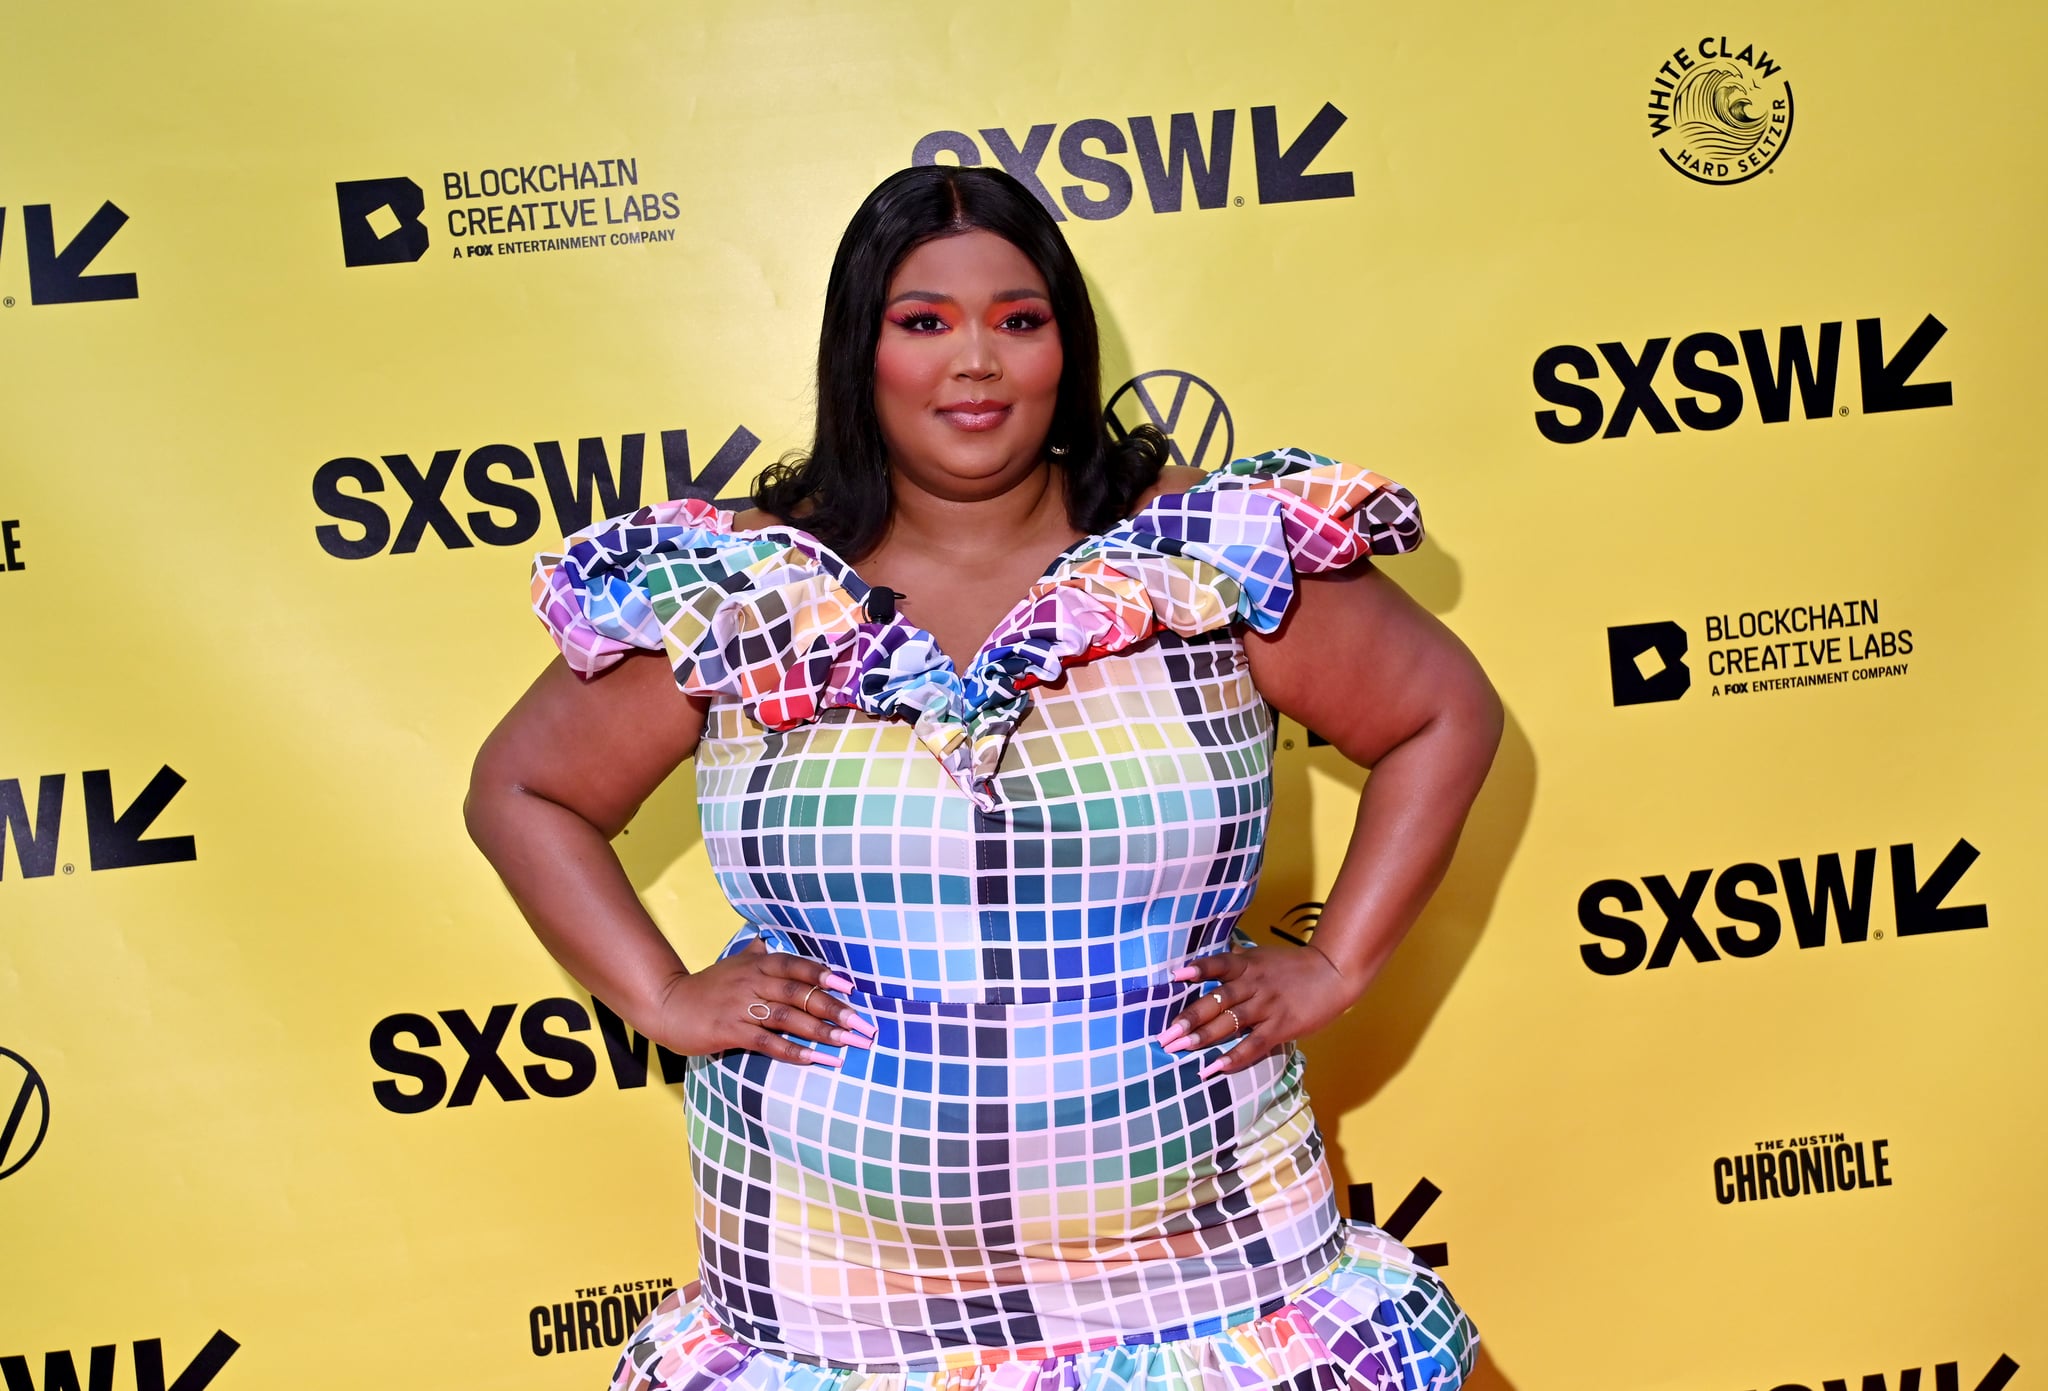 AUSTIN, TEXAS - MARCH 13: Lizzo attends the 2022 SXSW Conference and Festivals at Austin Convention Center on March 13, 2022 in Austin, Texas. (Photo by Chris Saucedo/Getty Images for SXSW)